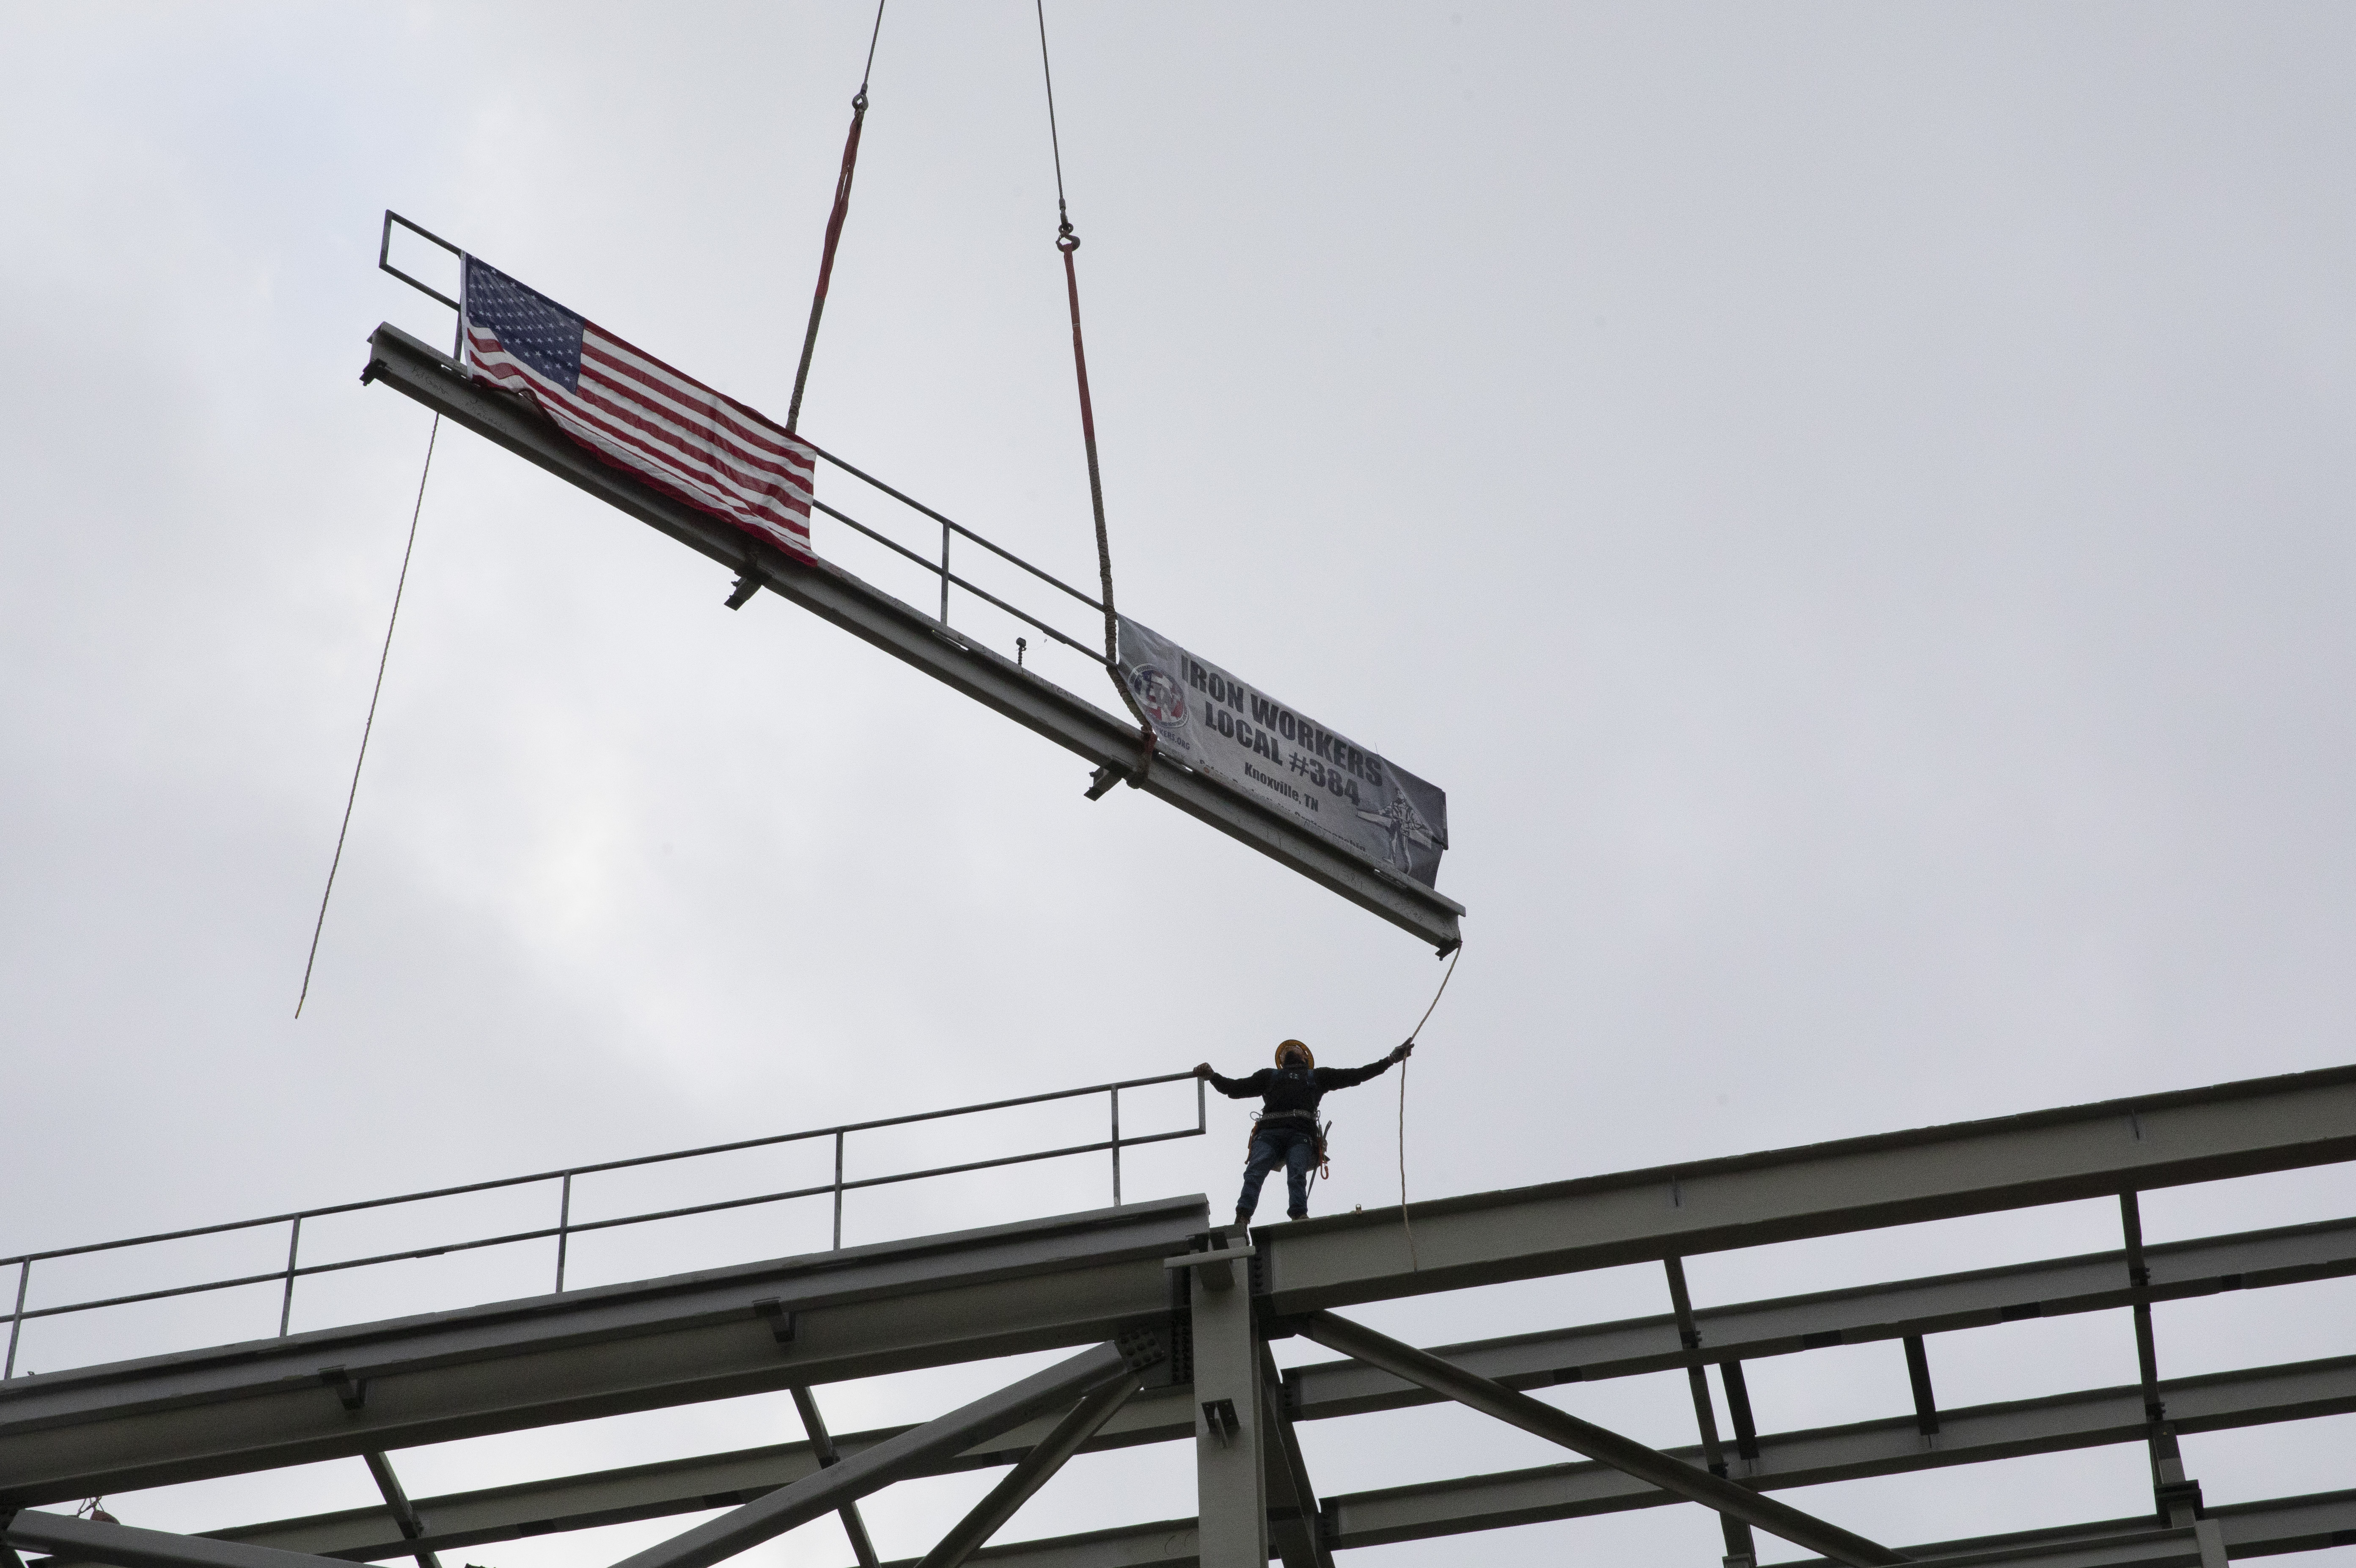 UPF placed the last piece of steel on the Salvage and Accountability with a topping out ceremony on October 26, 2020